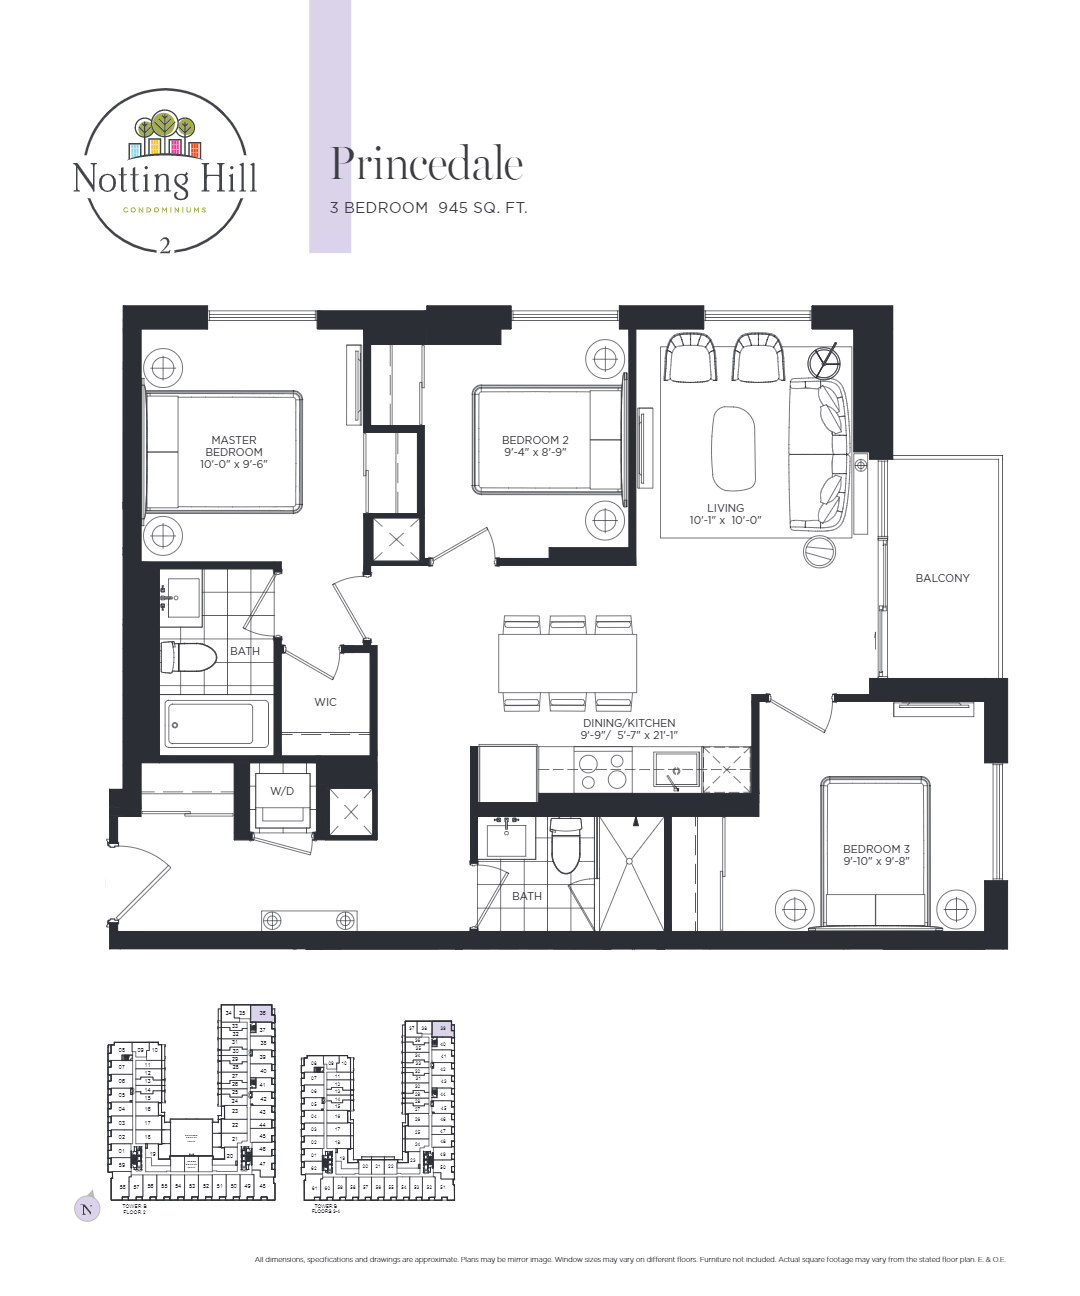  Floor Plan of Notting Hill Condos with undefined beds